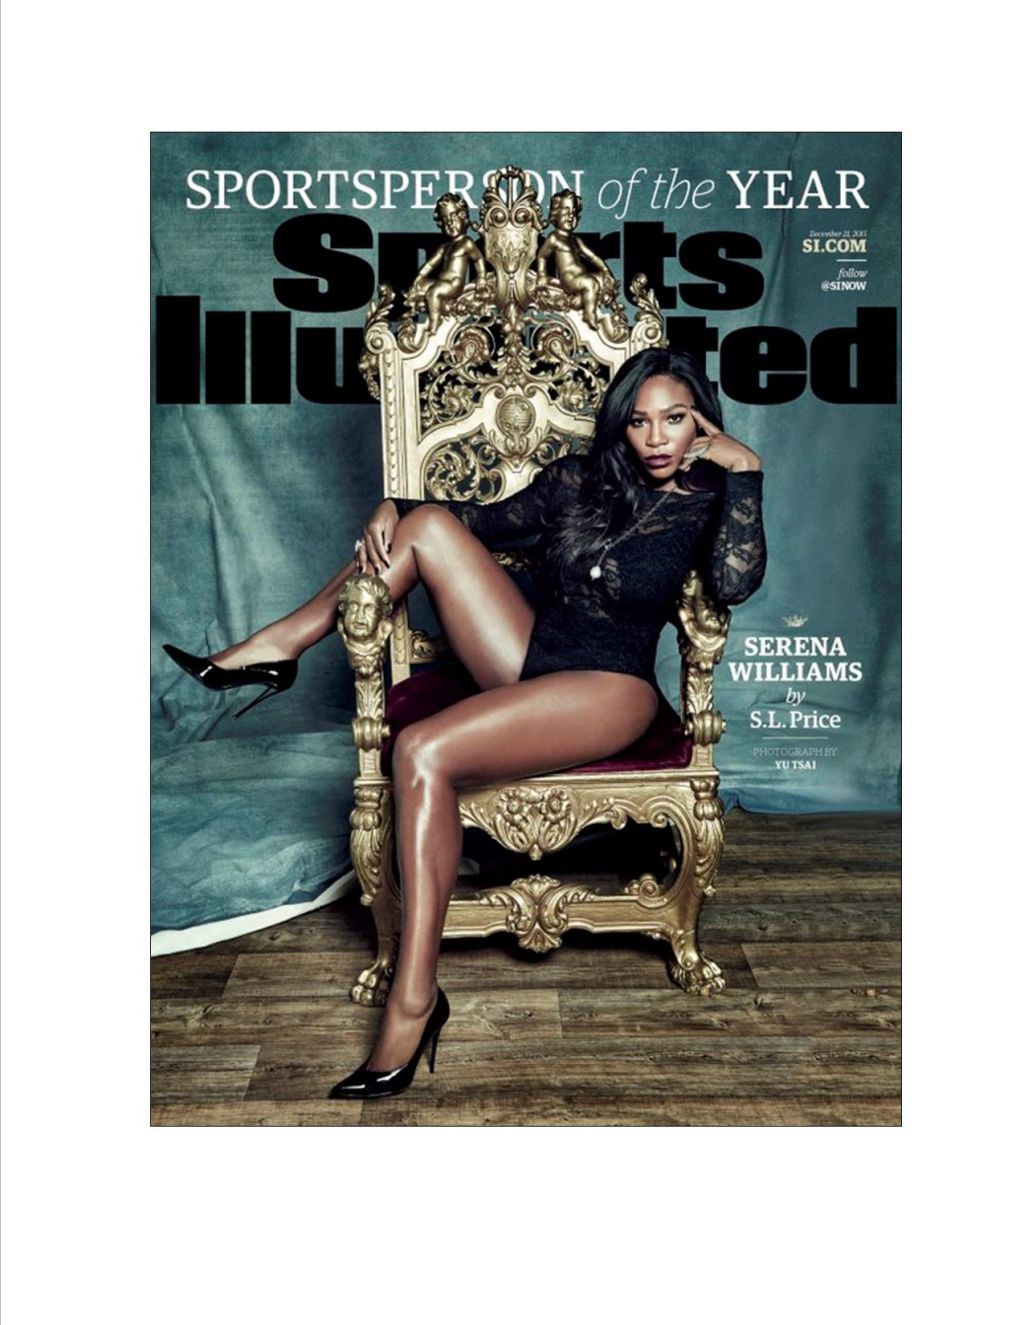 Serena Williams SI's 'Sportsperson of the Year' 2015